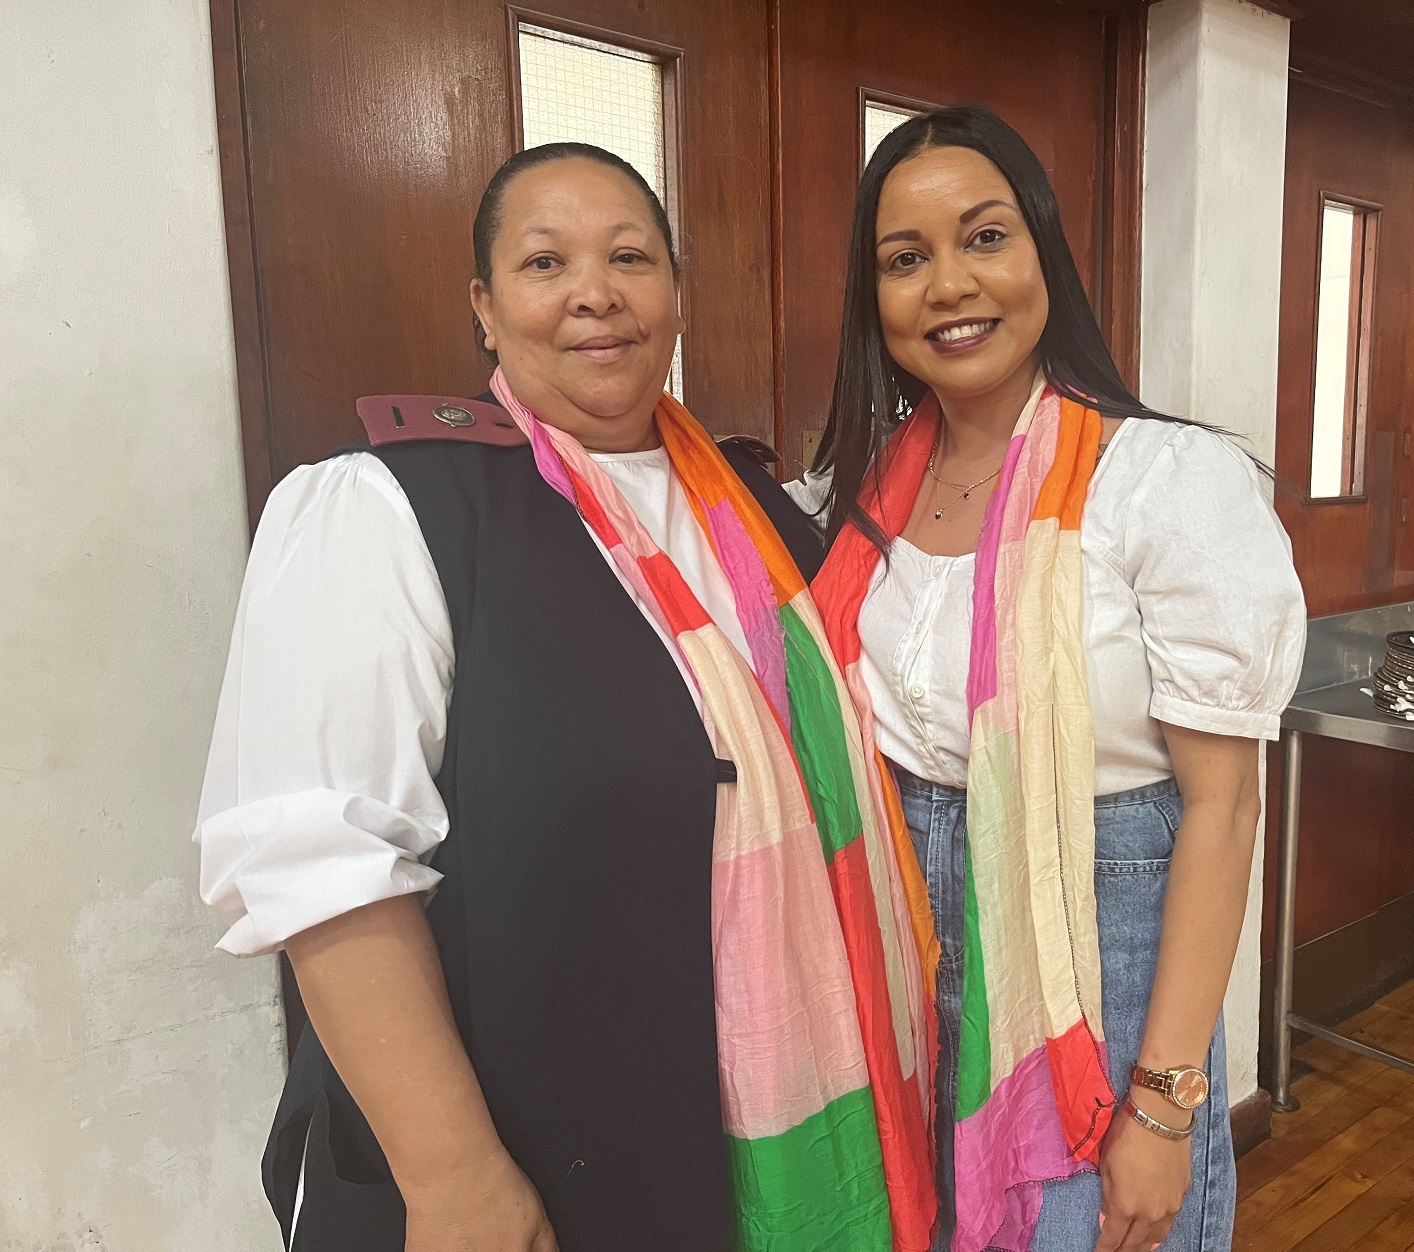 Western Cape Government mental health counsellor Zelah Dodgen (right) and mental health nurse Sandra Baloyi (left) are pictured at the launch of a youth-friendly clinic in Ruyterwacht, aimed at creating safe spaces for youth to access healthcare.